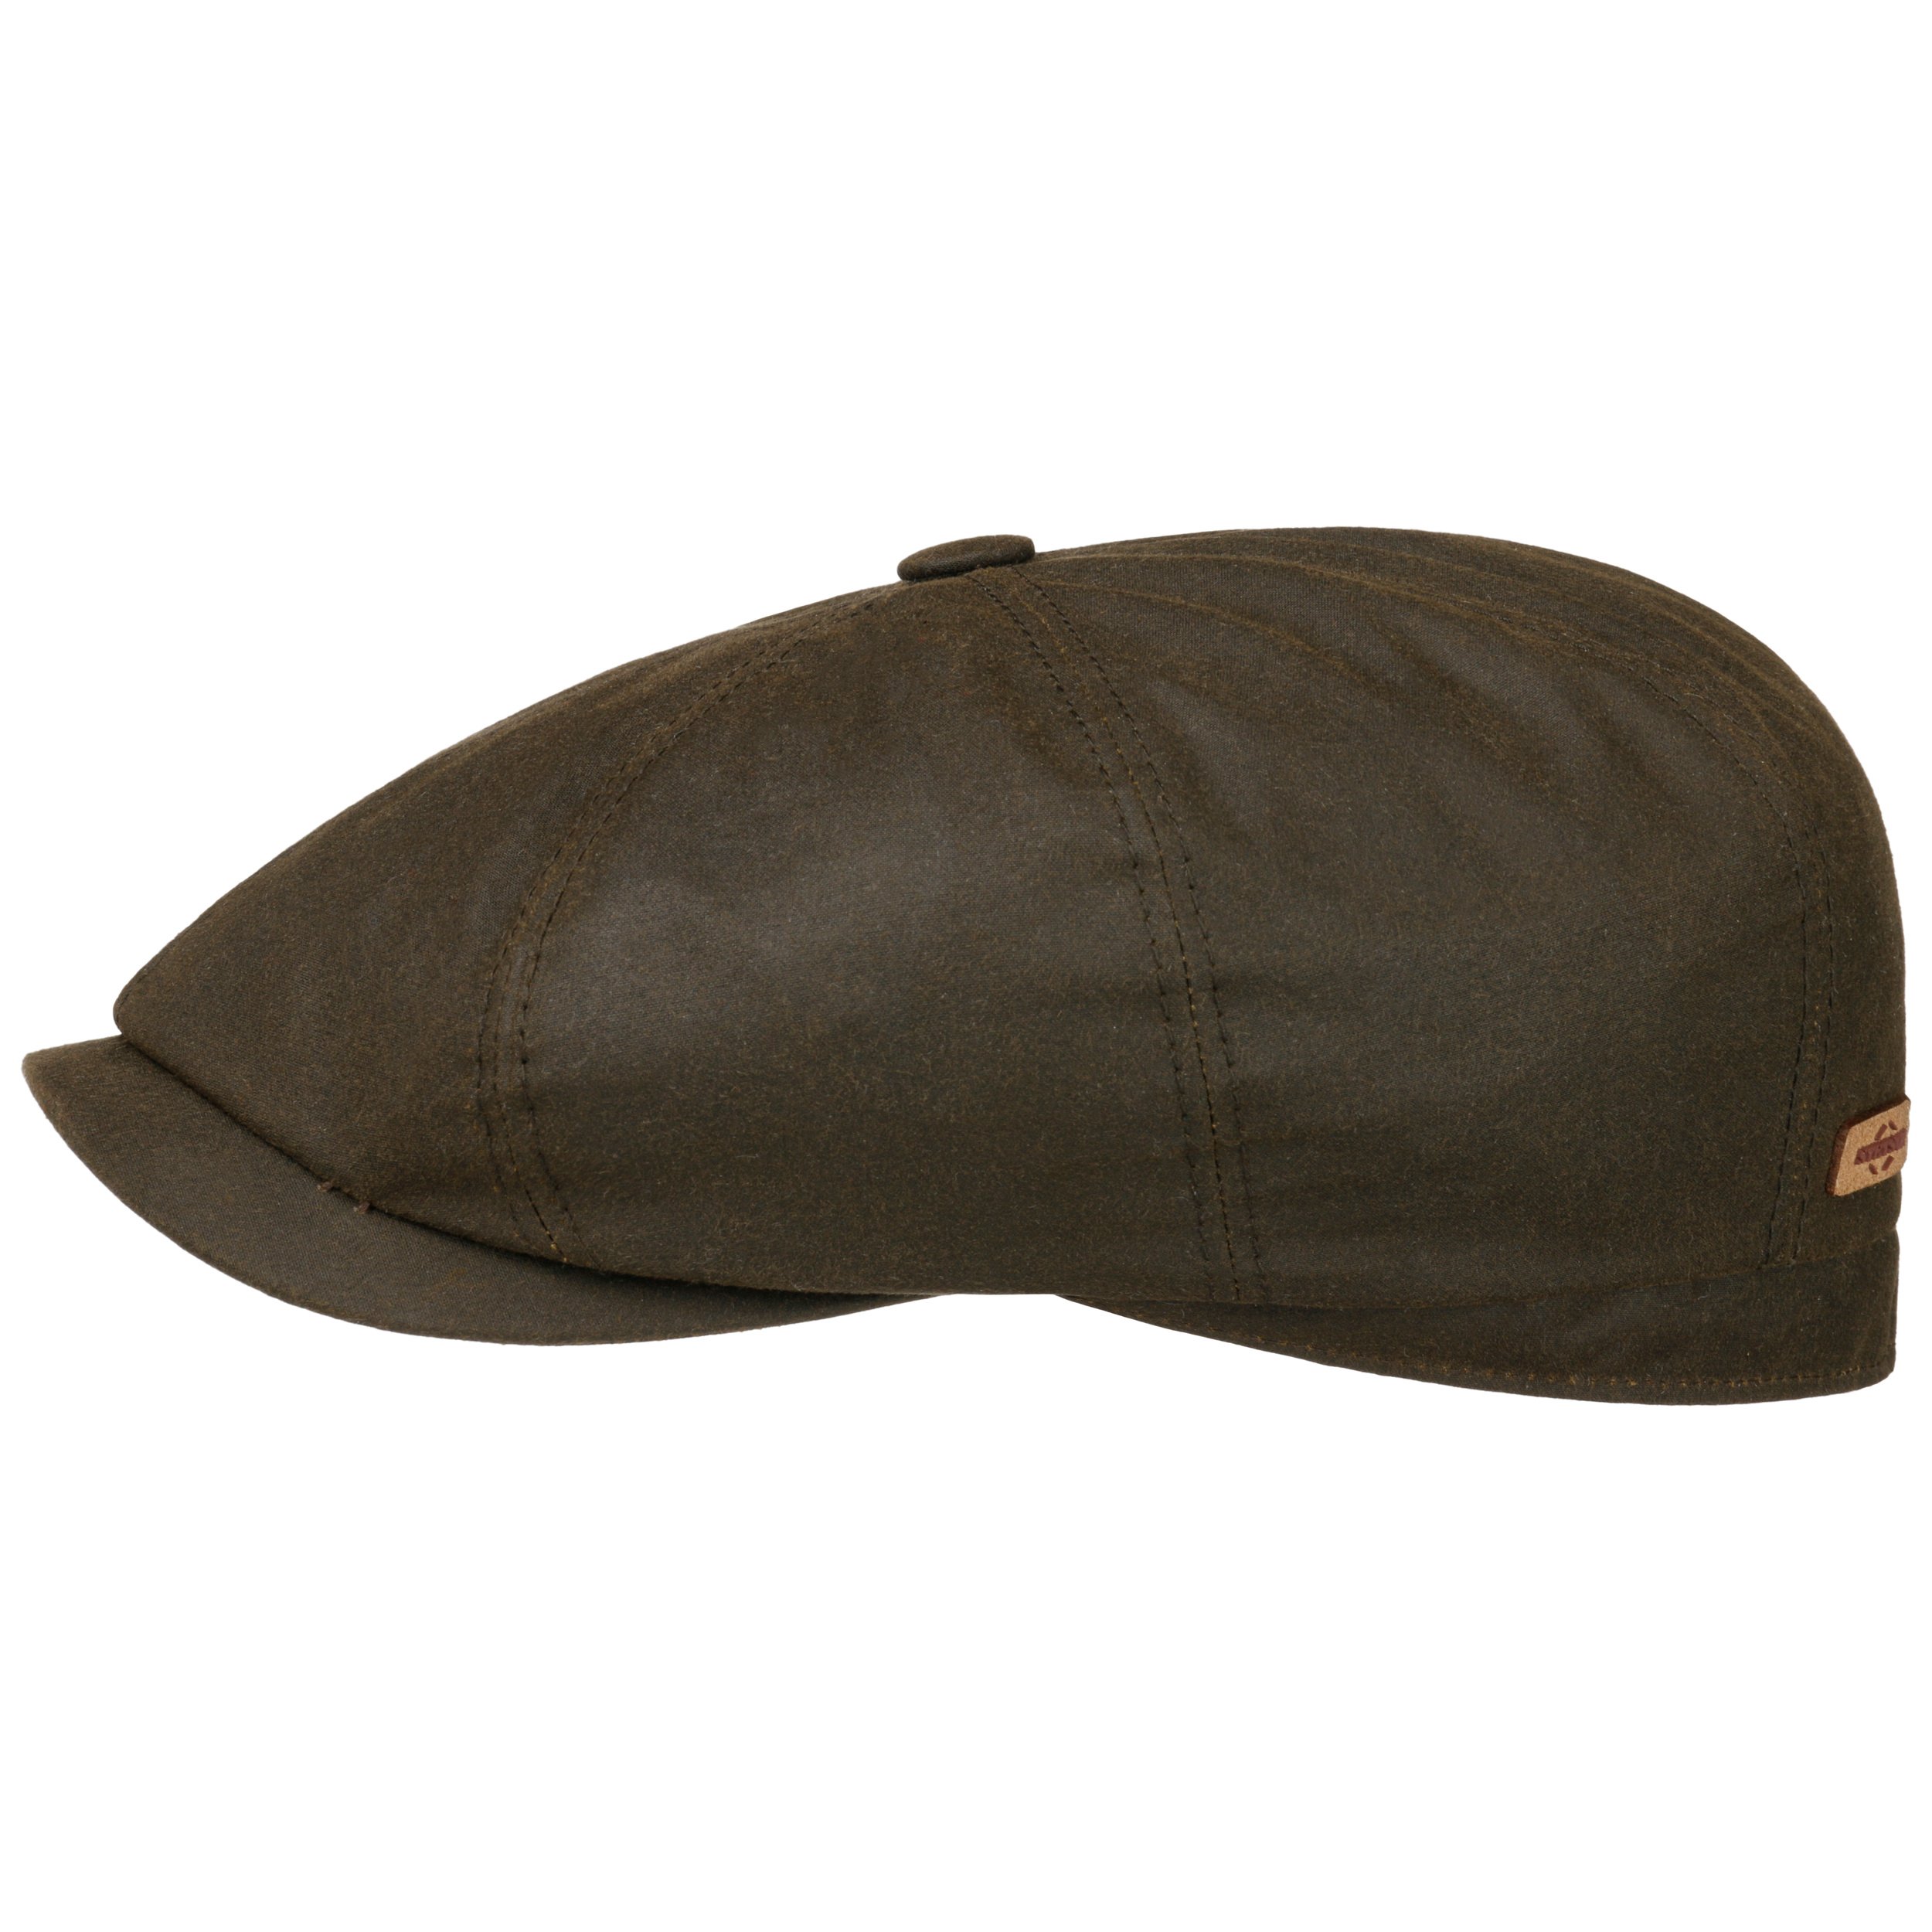 Hatteras Classic Waxed Cotton Flat Cap by Stetson - 99,00